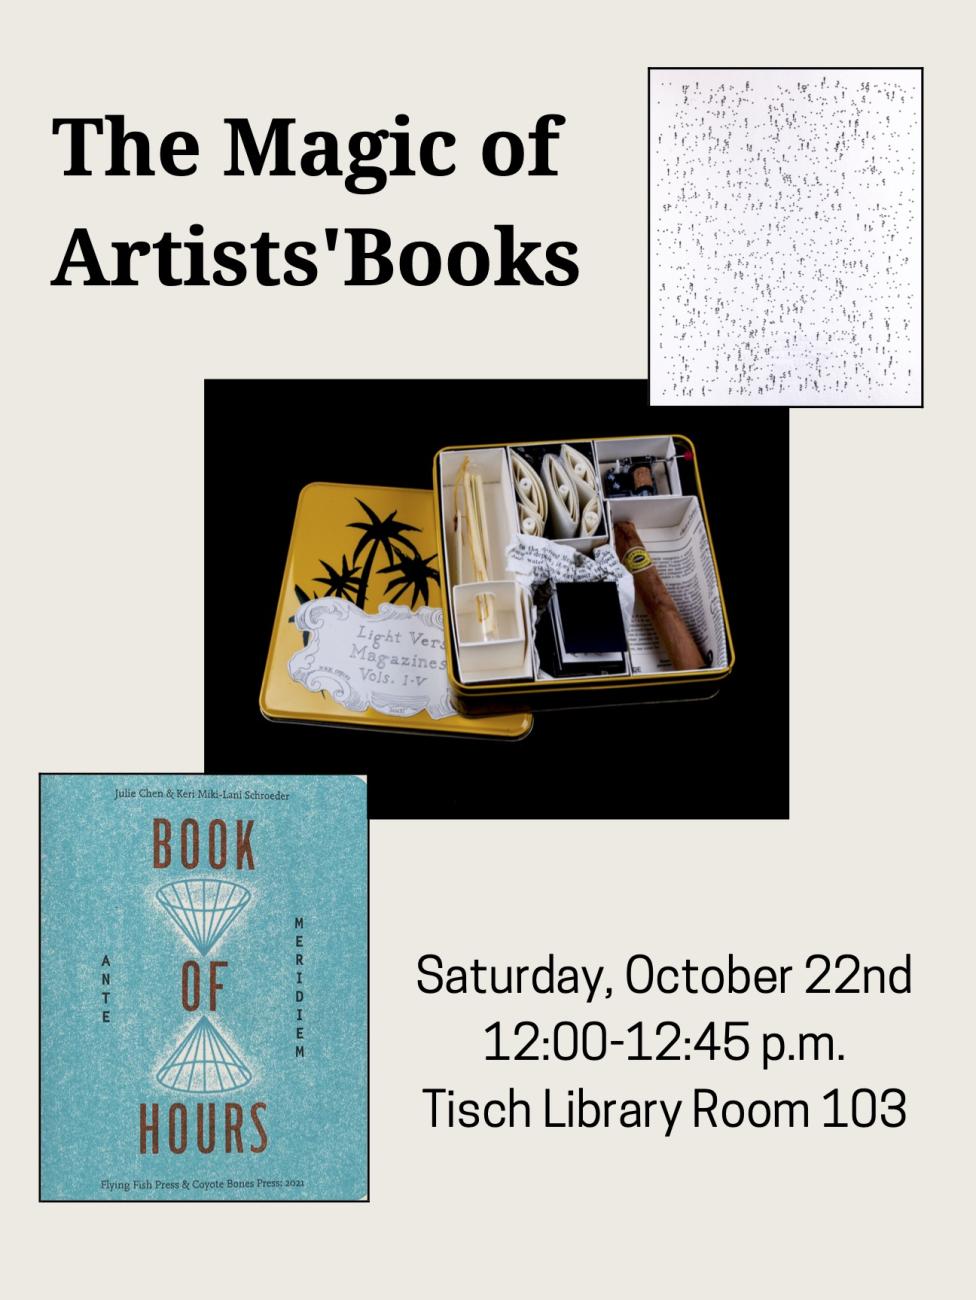 The Magic of Artists' Books on Saturday, October 22nd from 12:00-12:45 pm in Tisch Library Room 103.